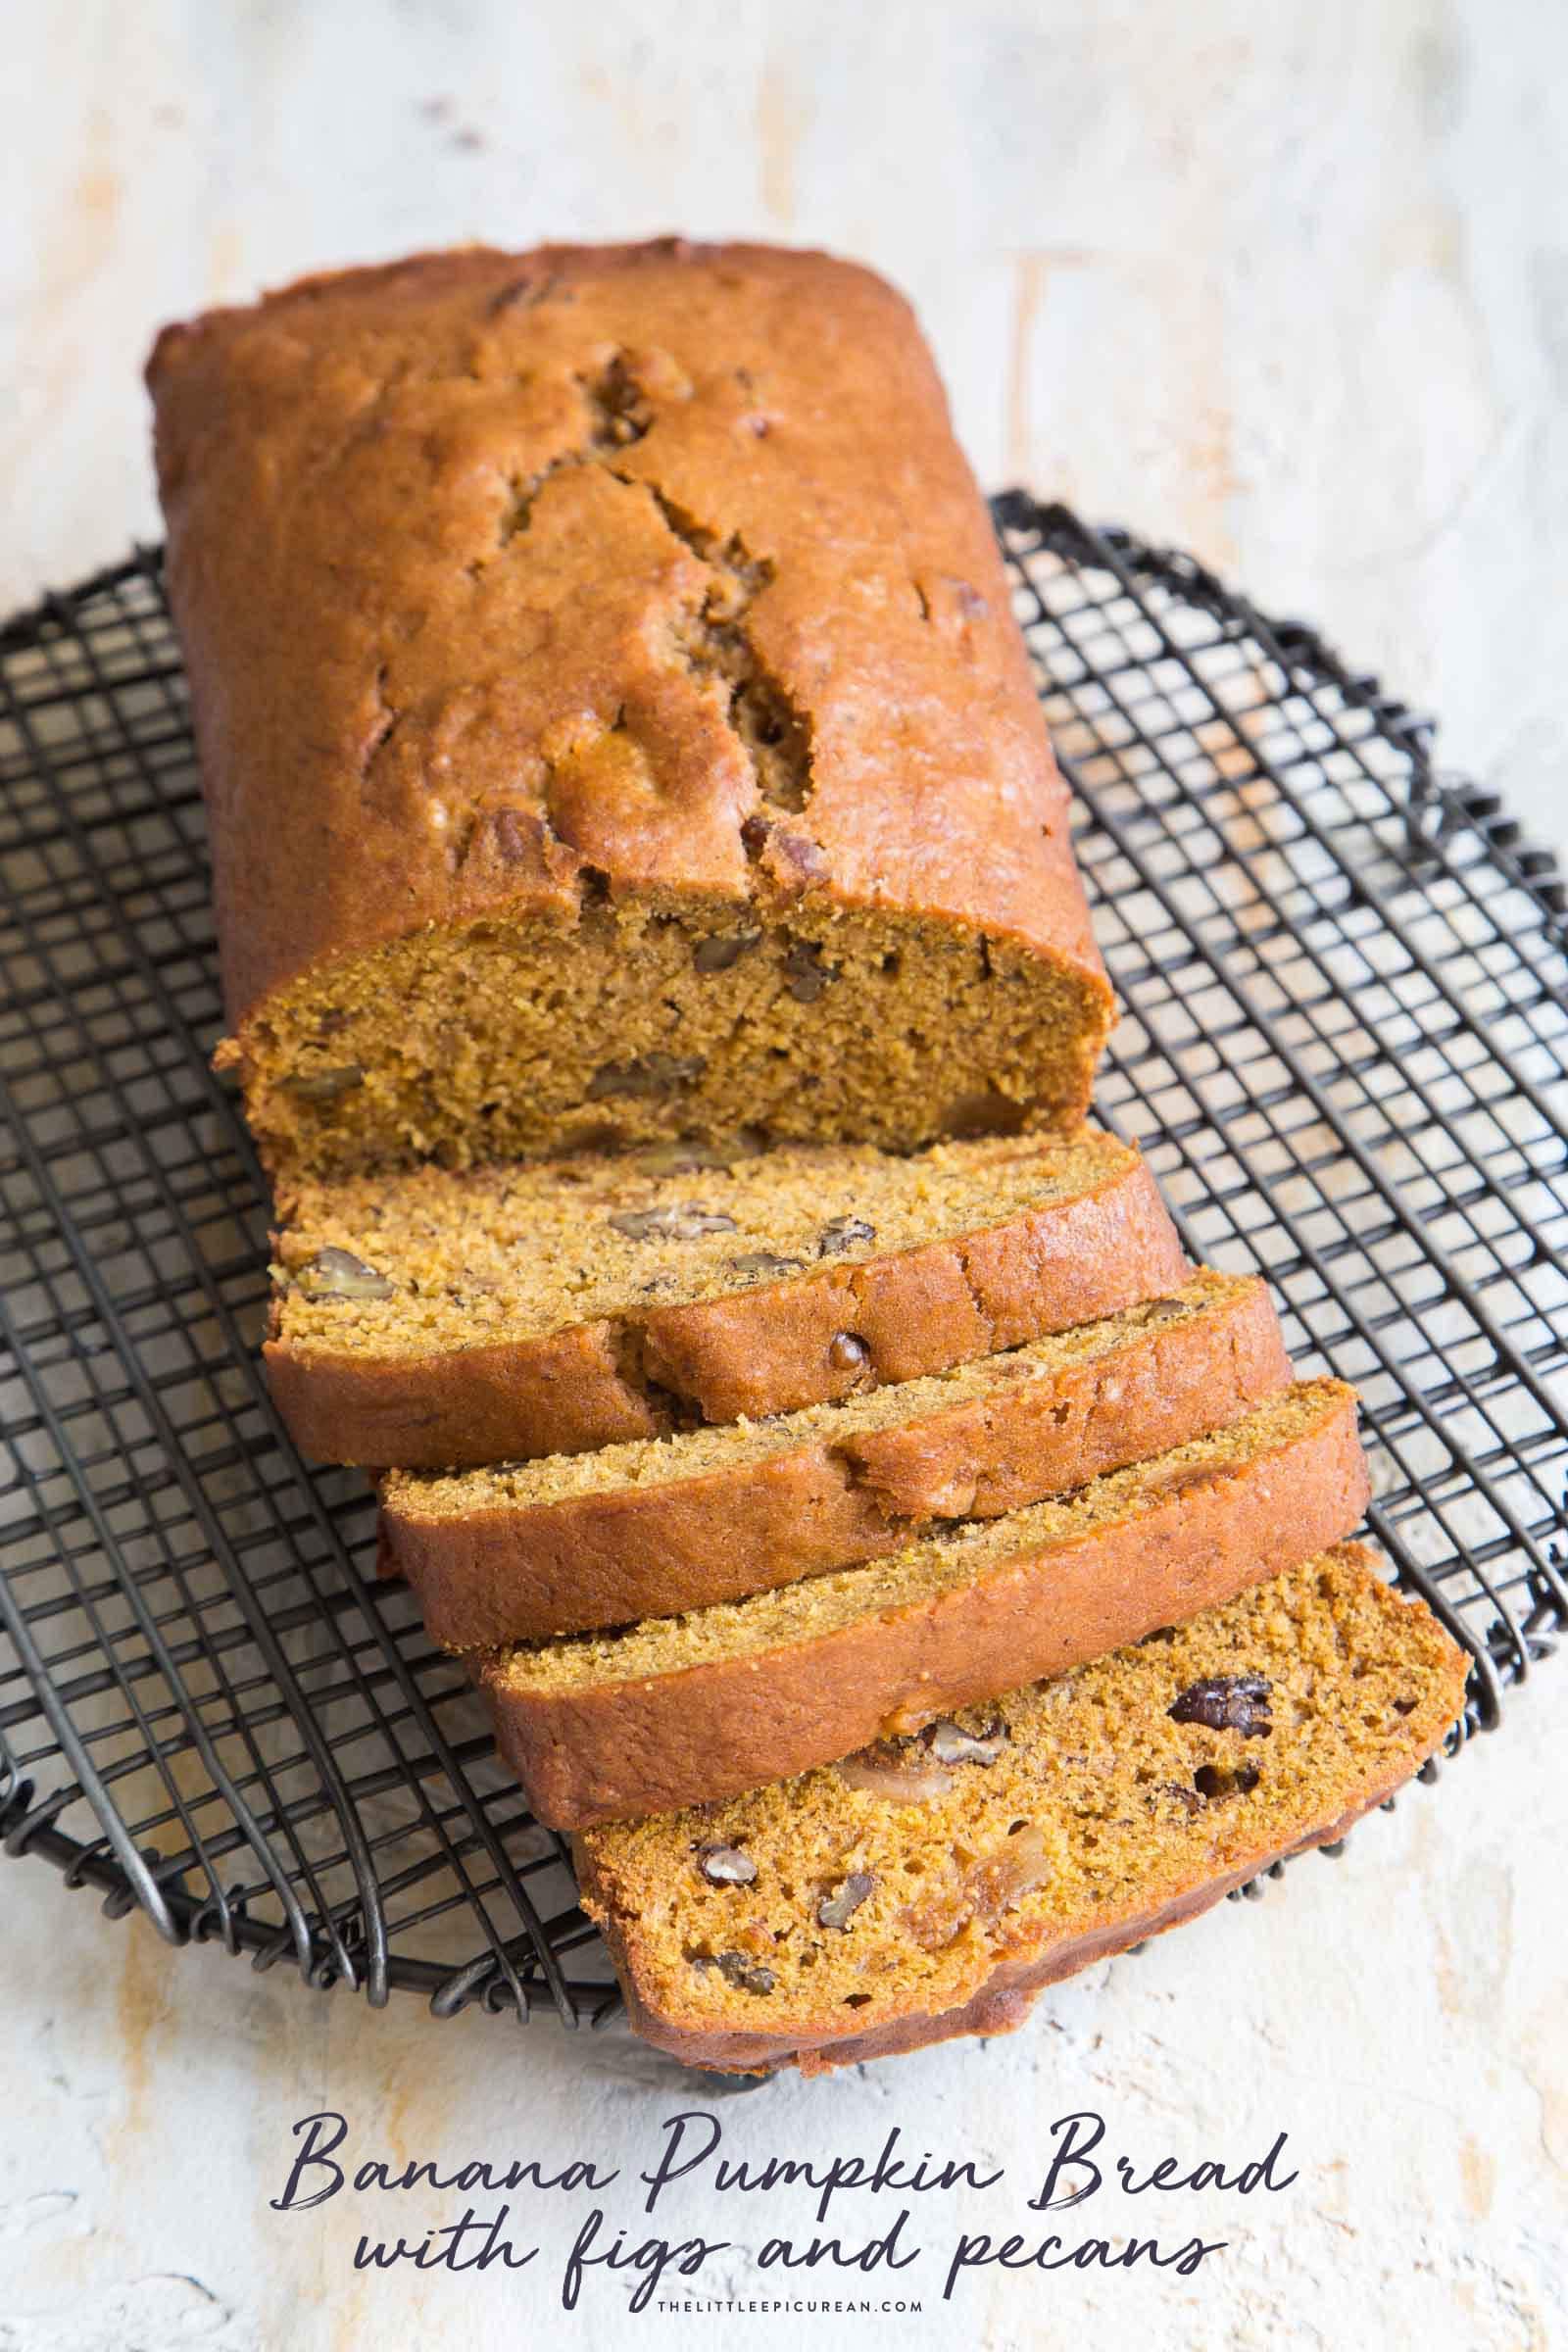 Banana Pumpkin Bread with dried figs and toasted pecans